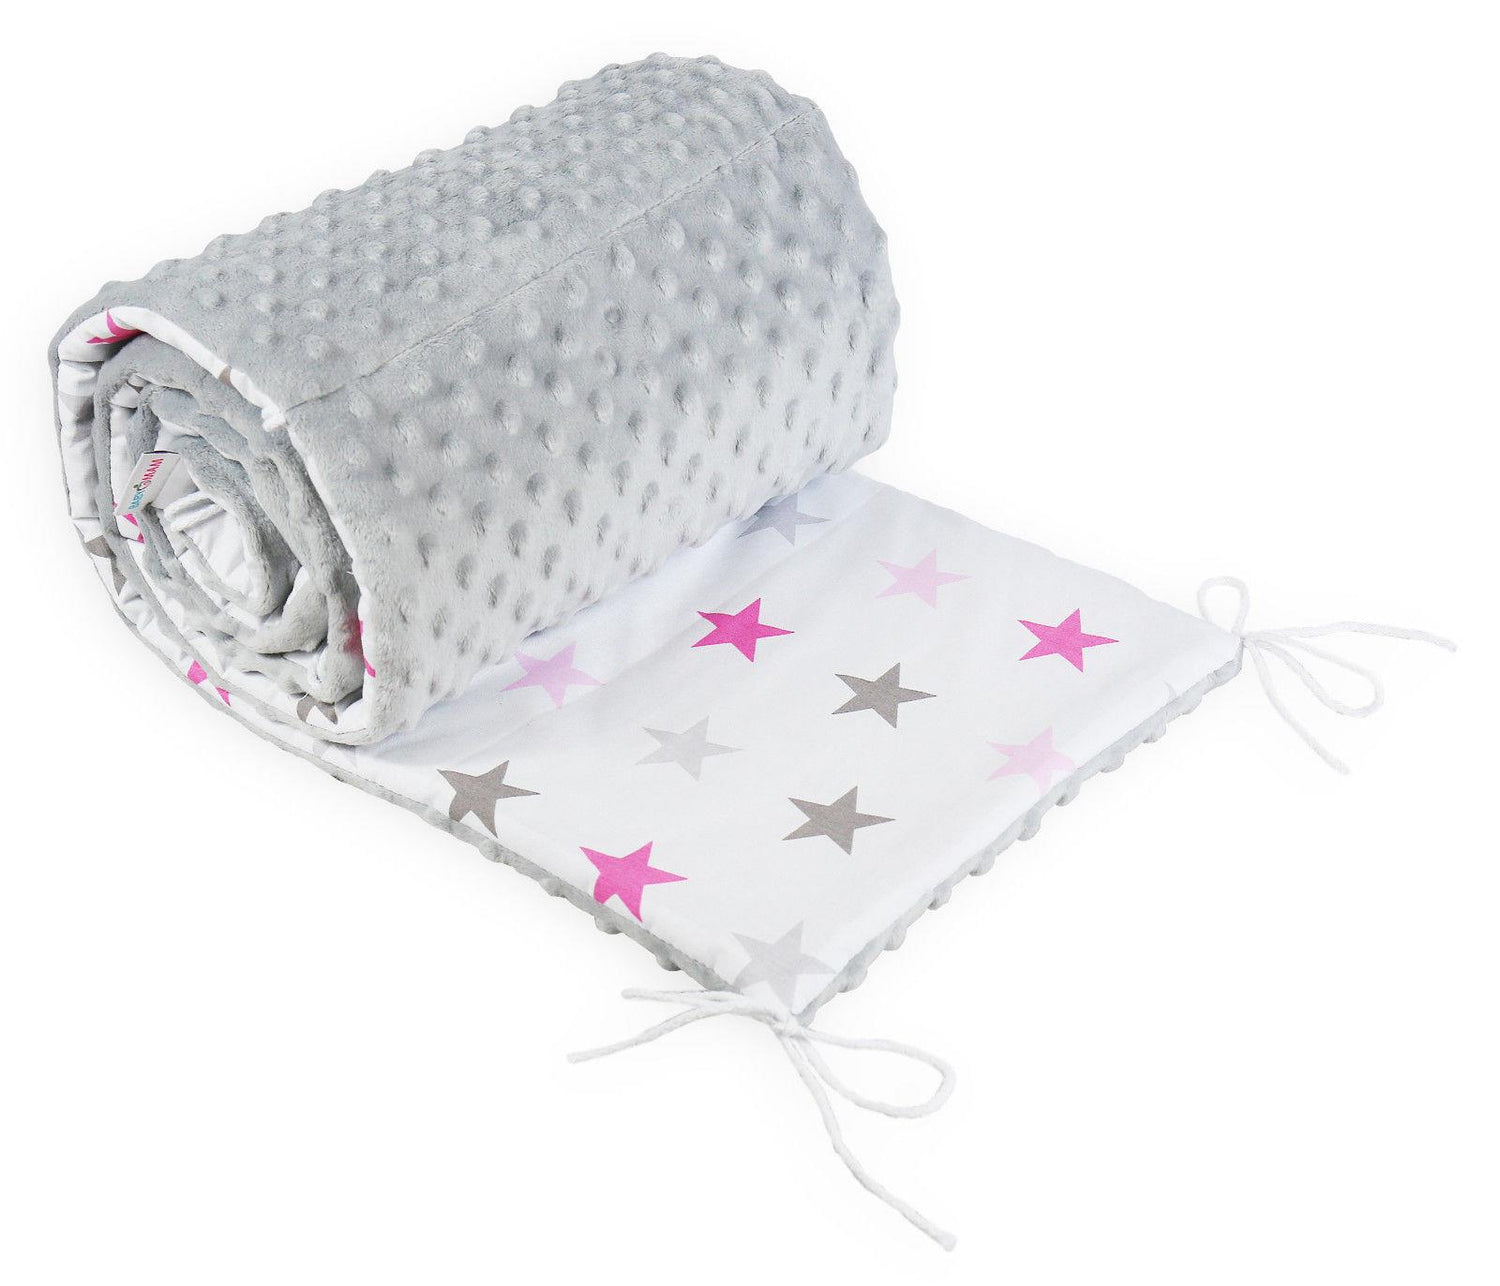 Baby dimple padded bumper nursery protection fit cot bed 140x70 190cm Grey / Pink grey stars